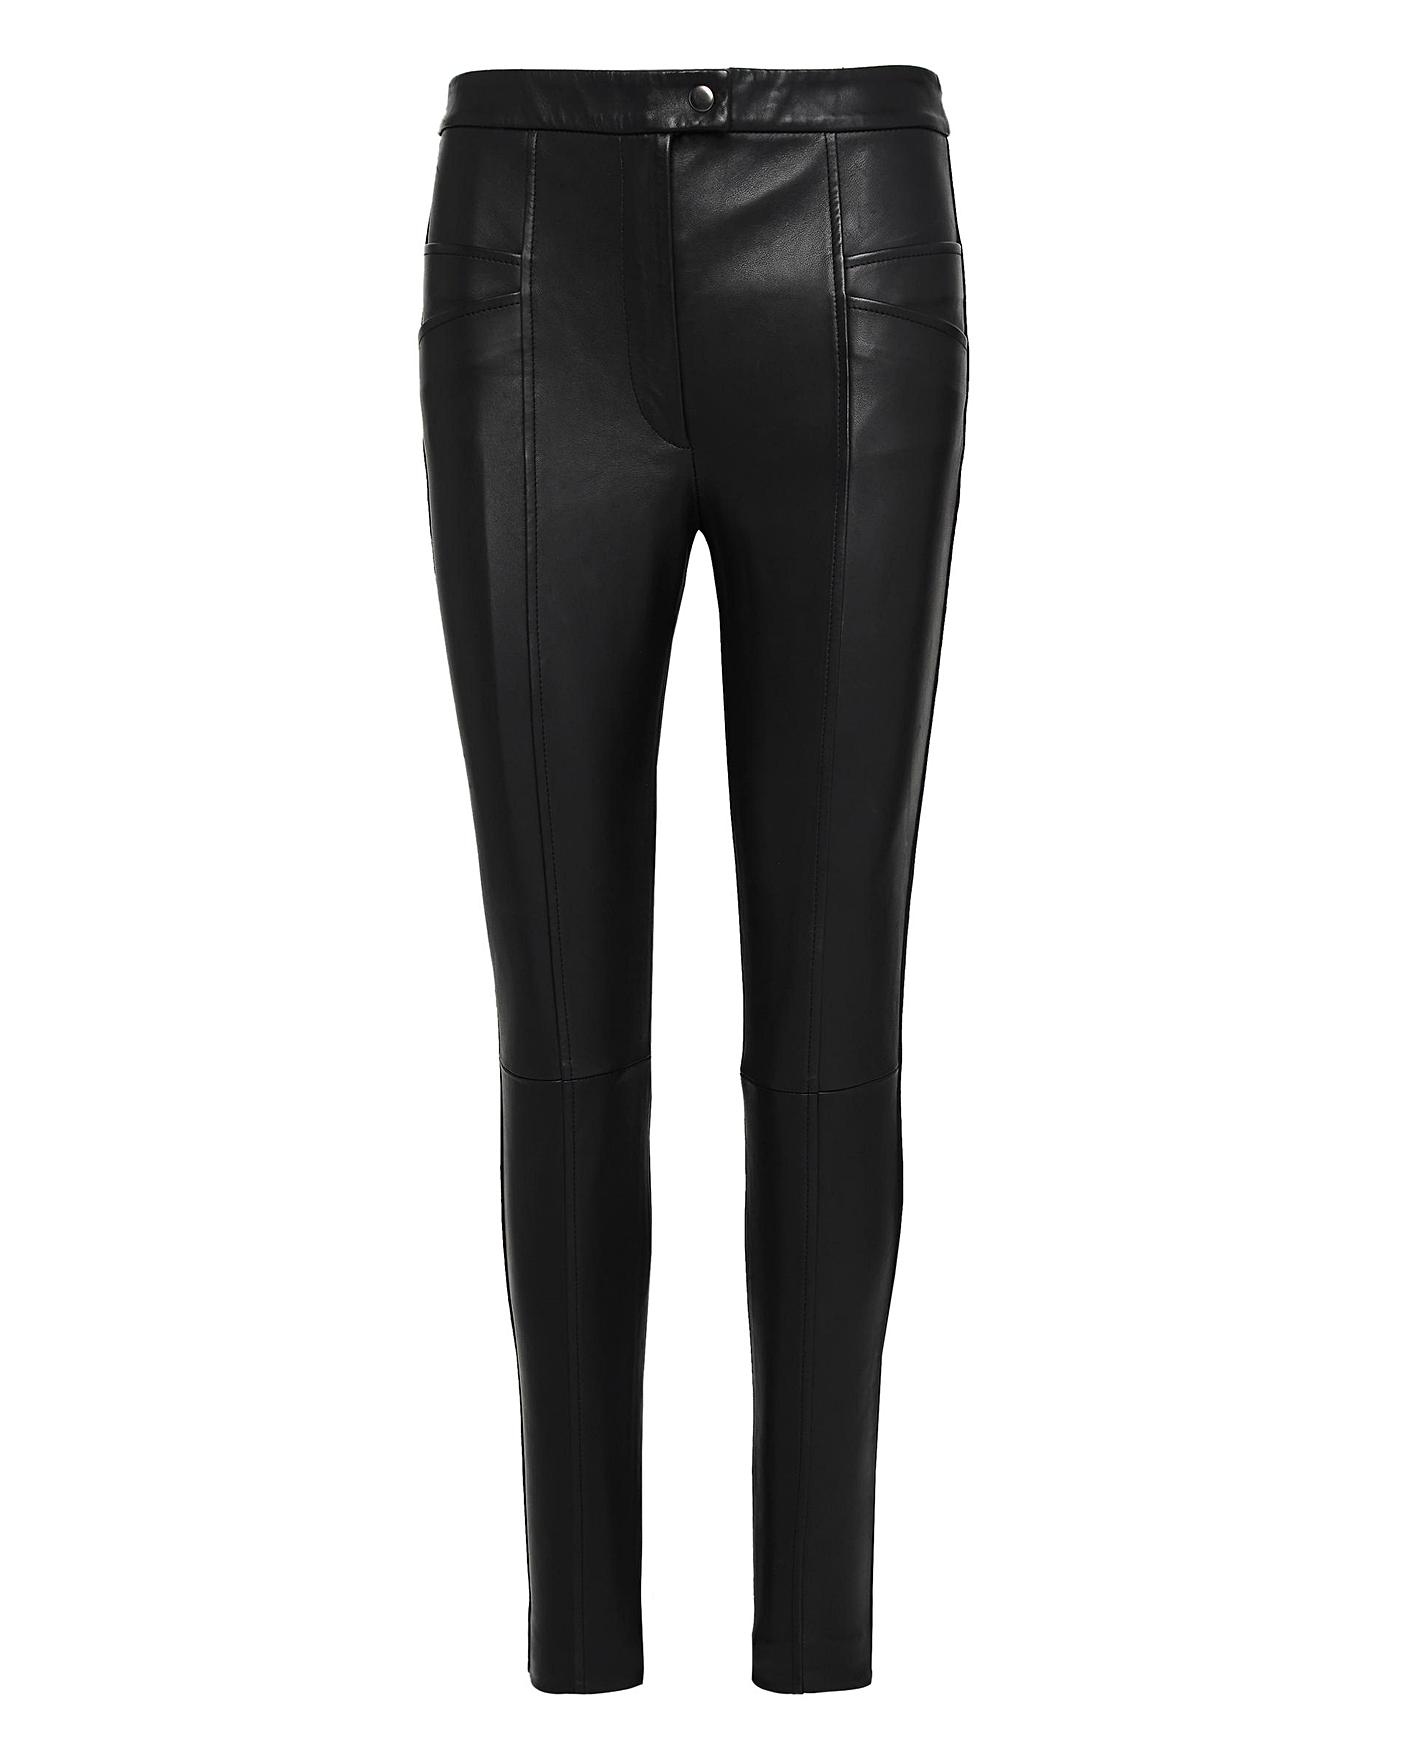 Details more than 73 real leather trousers latest - in.cdgdbentre